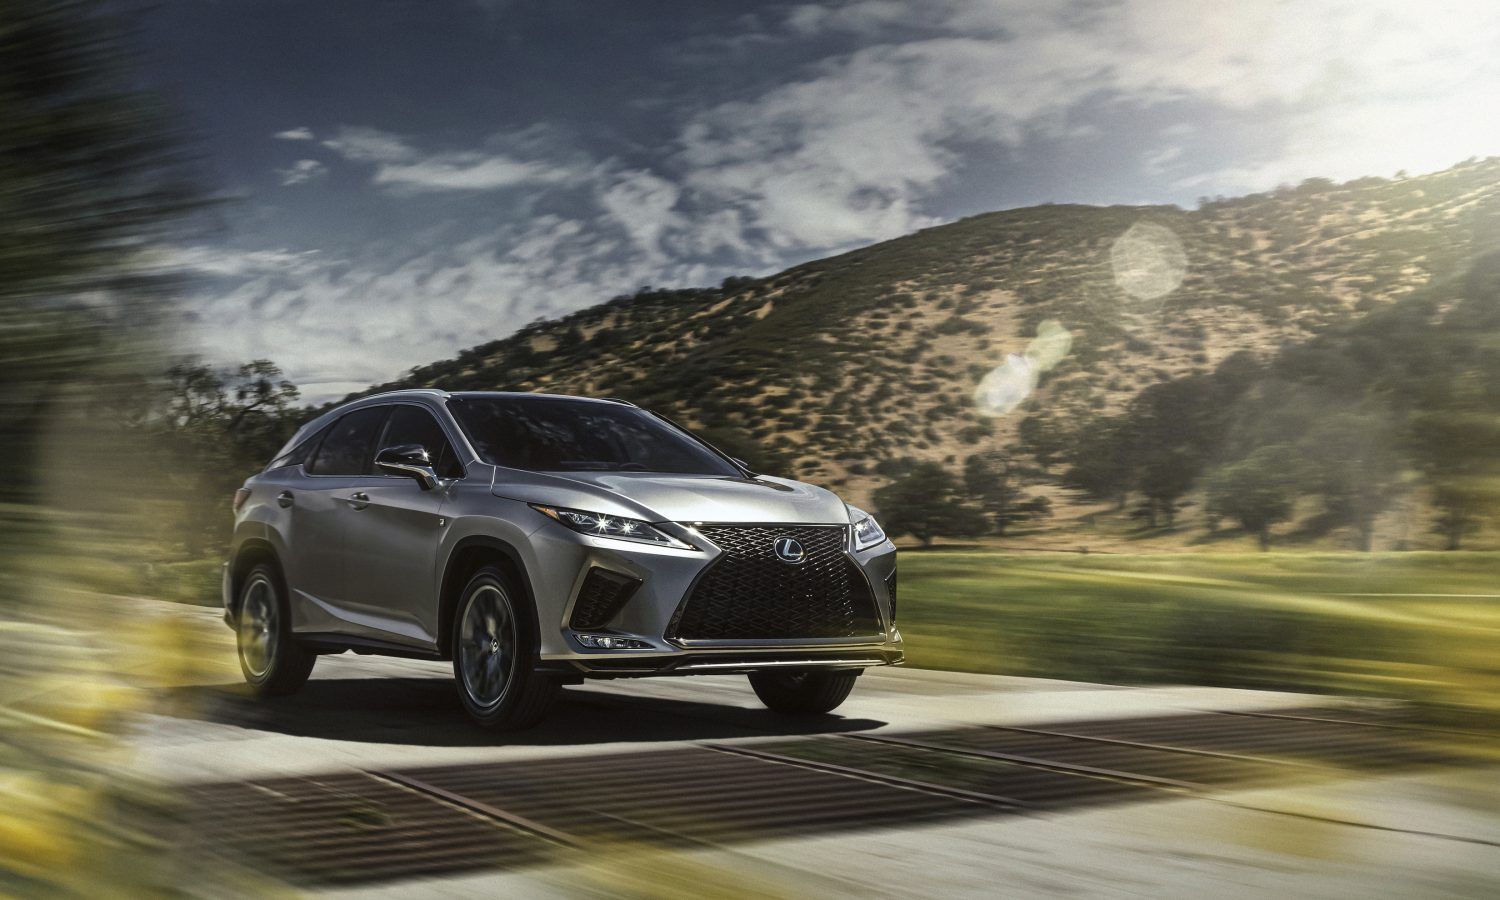 2021 Lexus RX 350 F Sport surrounded by greenery